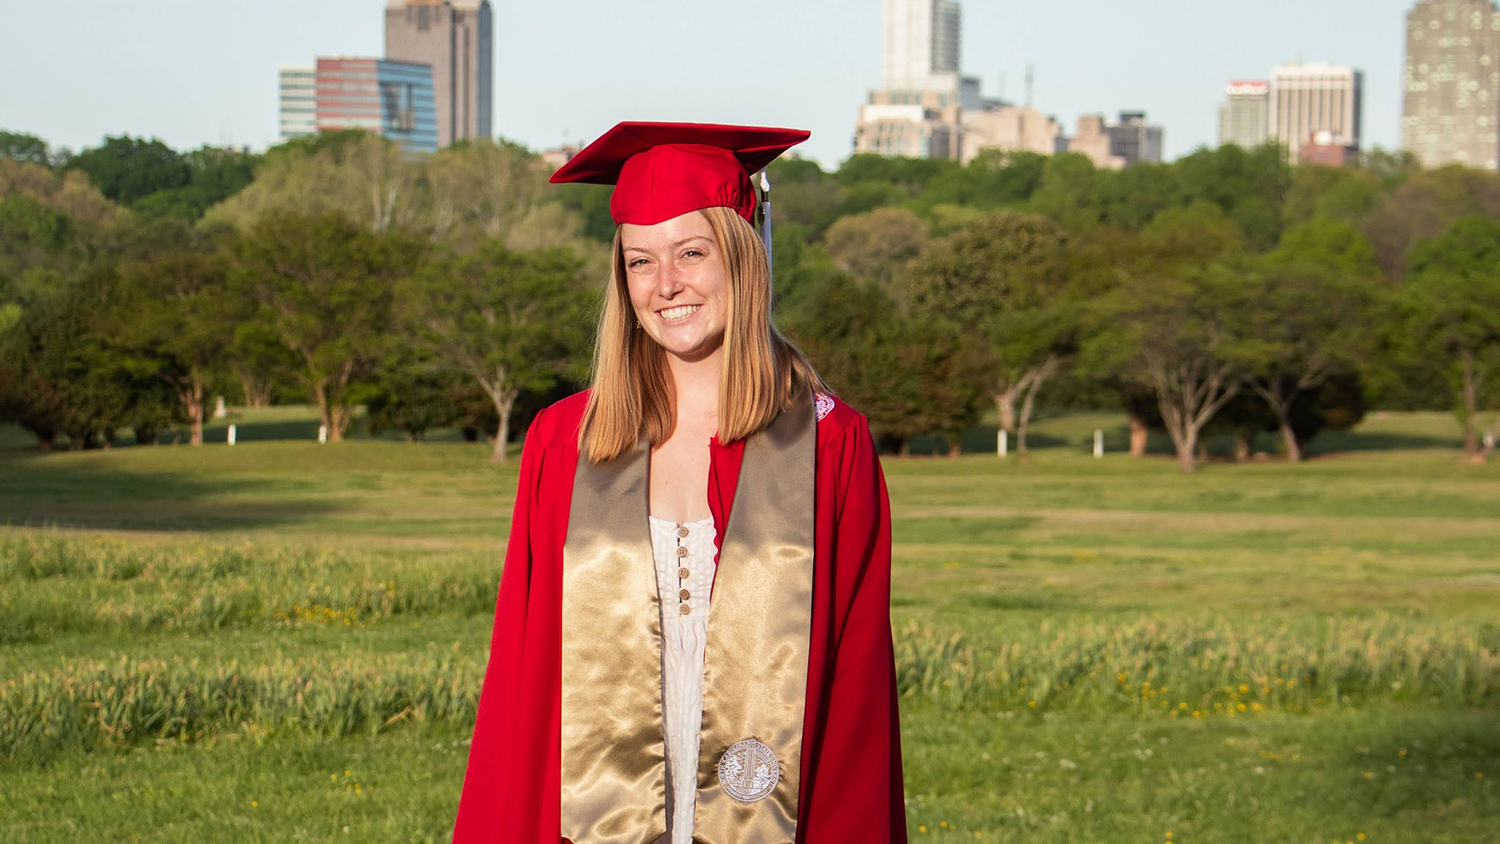 NC State student Massey Stichter poses in a graduation cap and gown